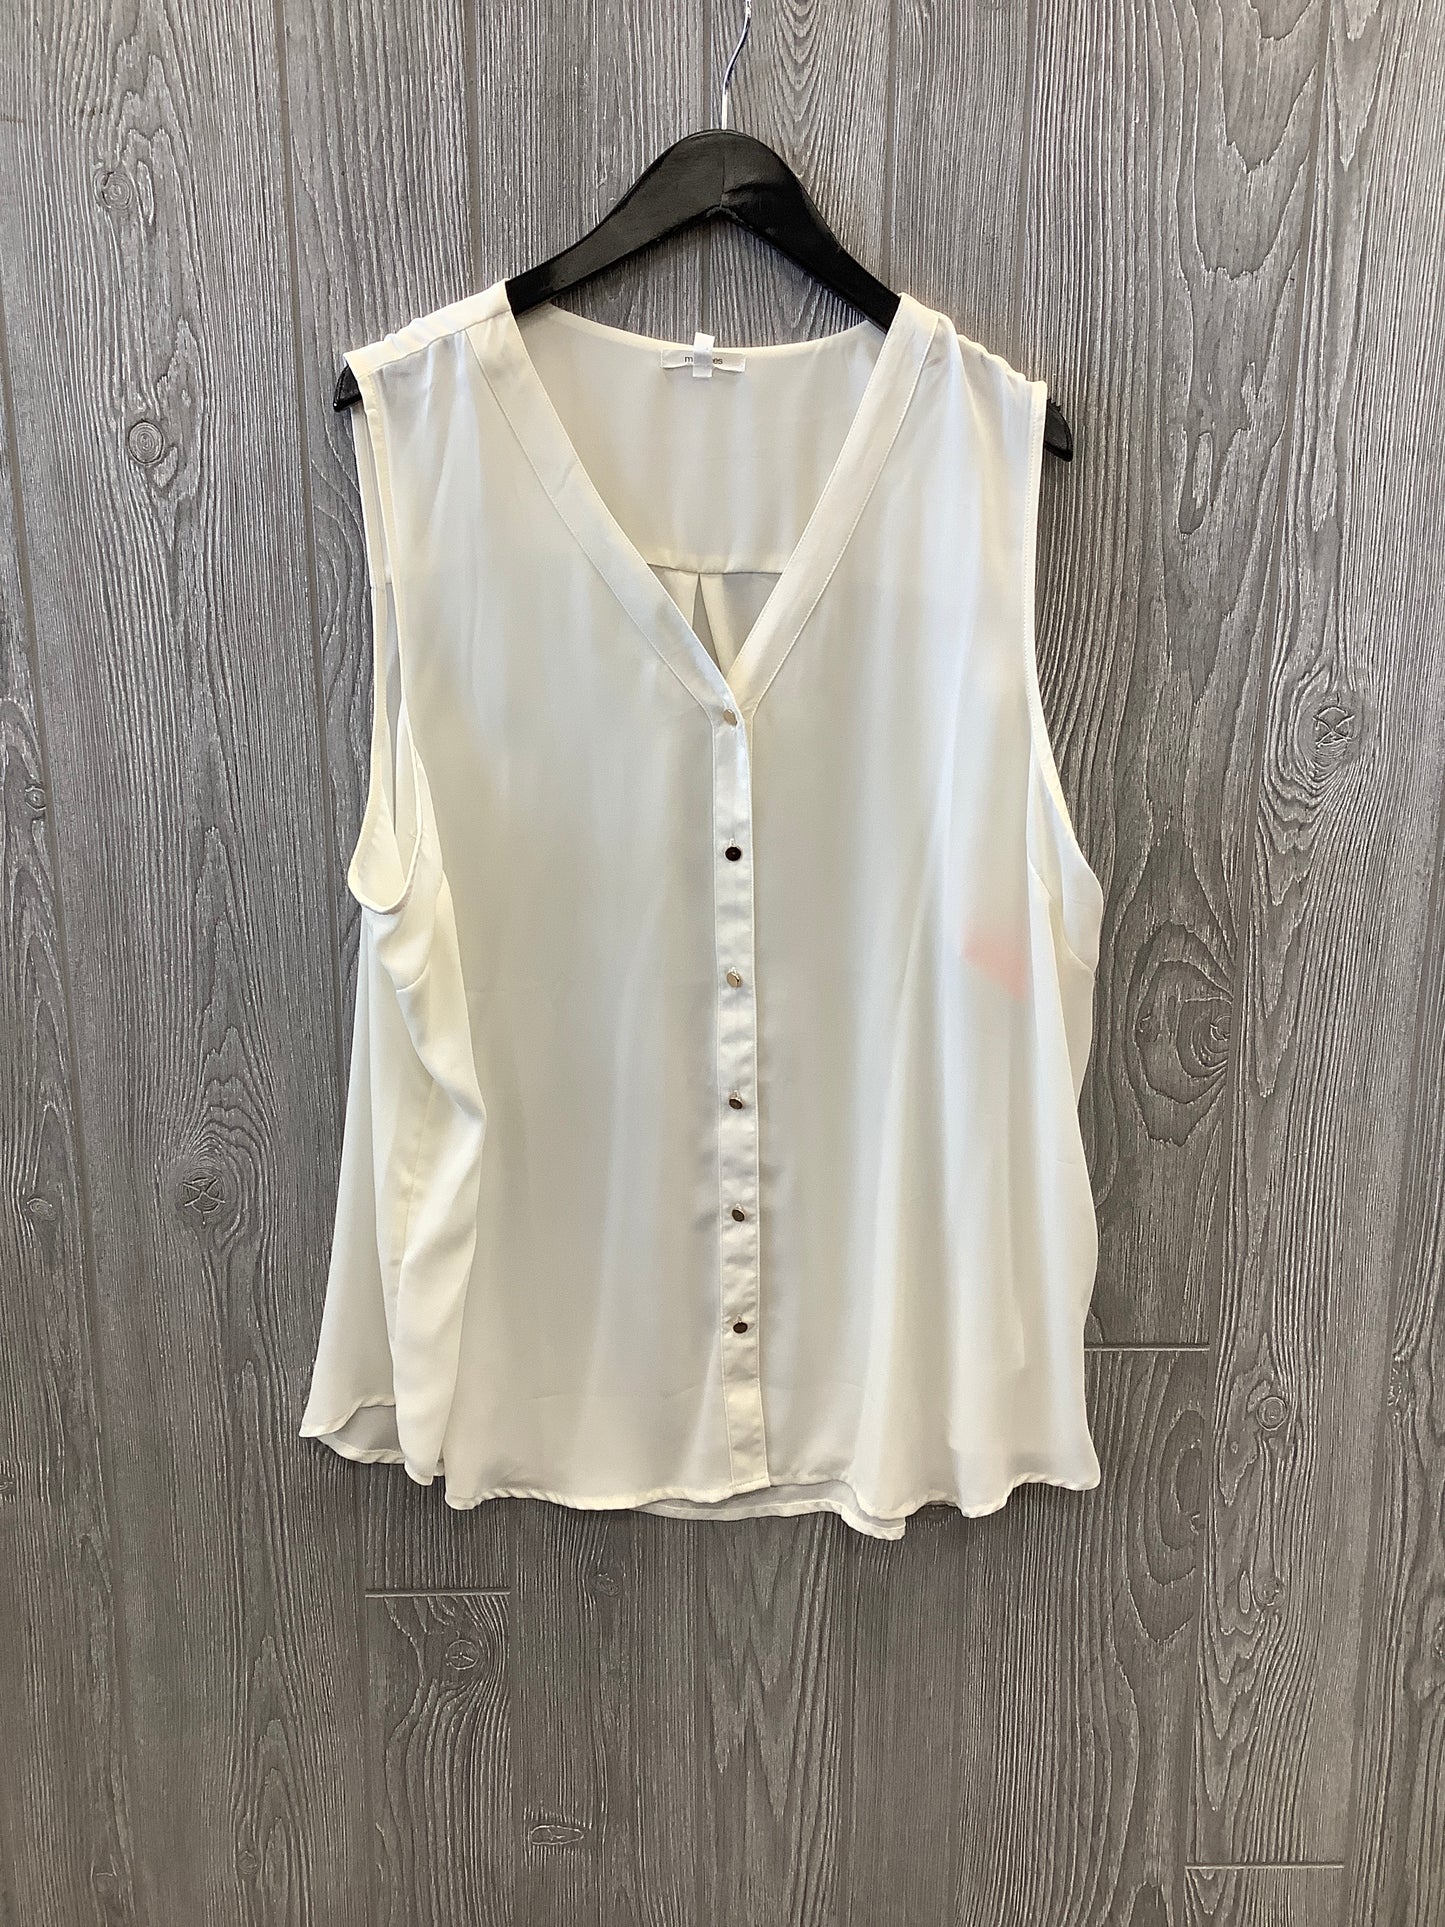 Blouse Sleeveless By Maurices  Size: 2x